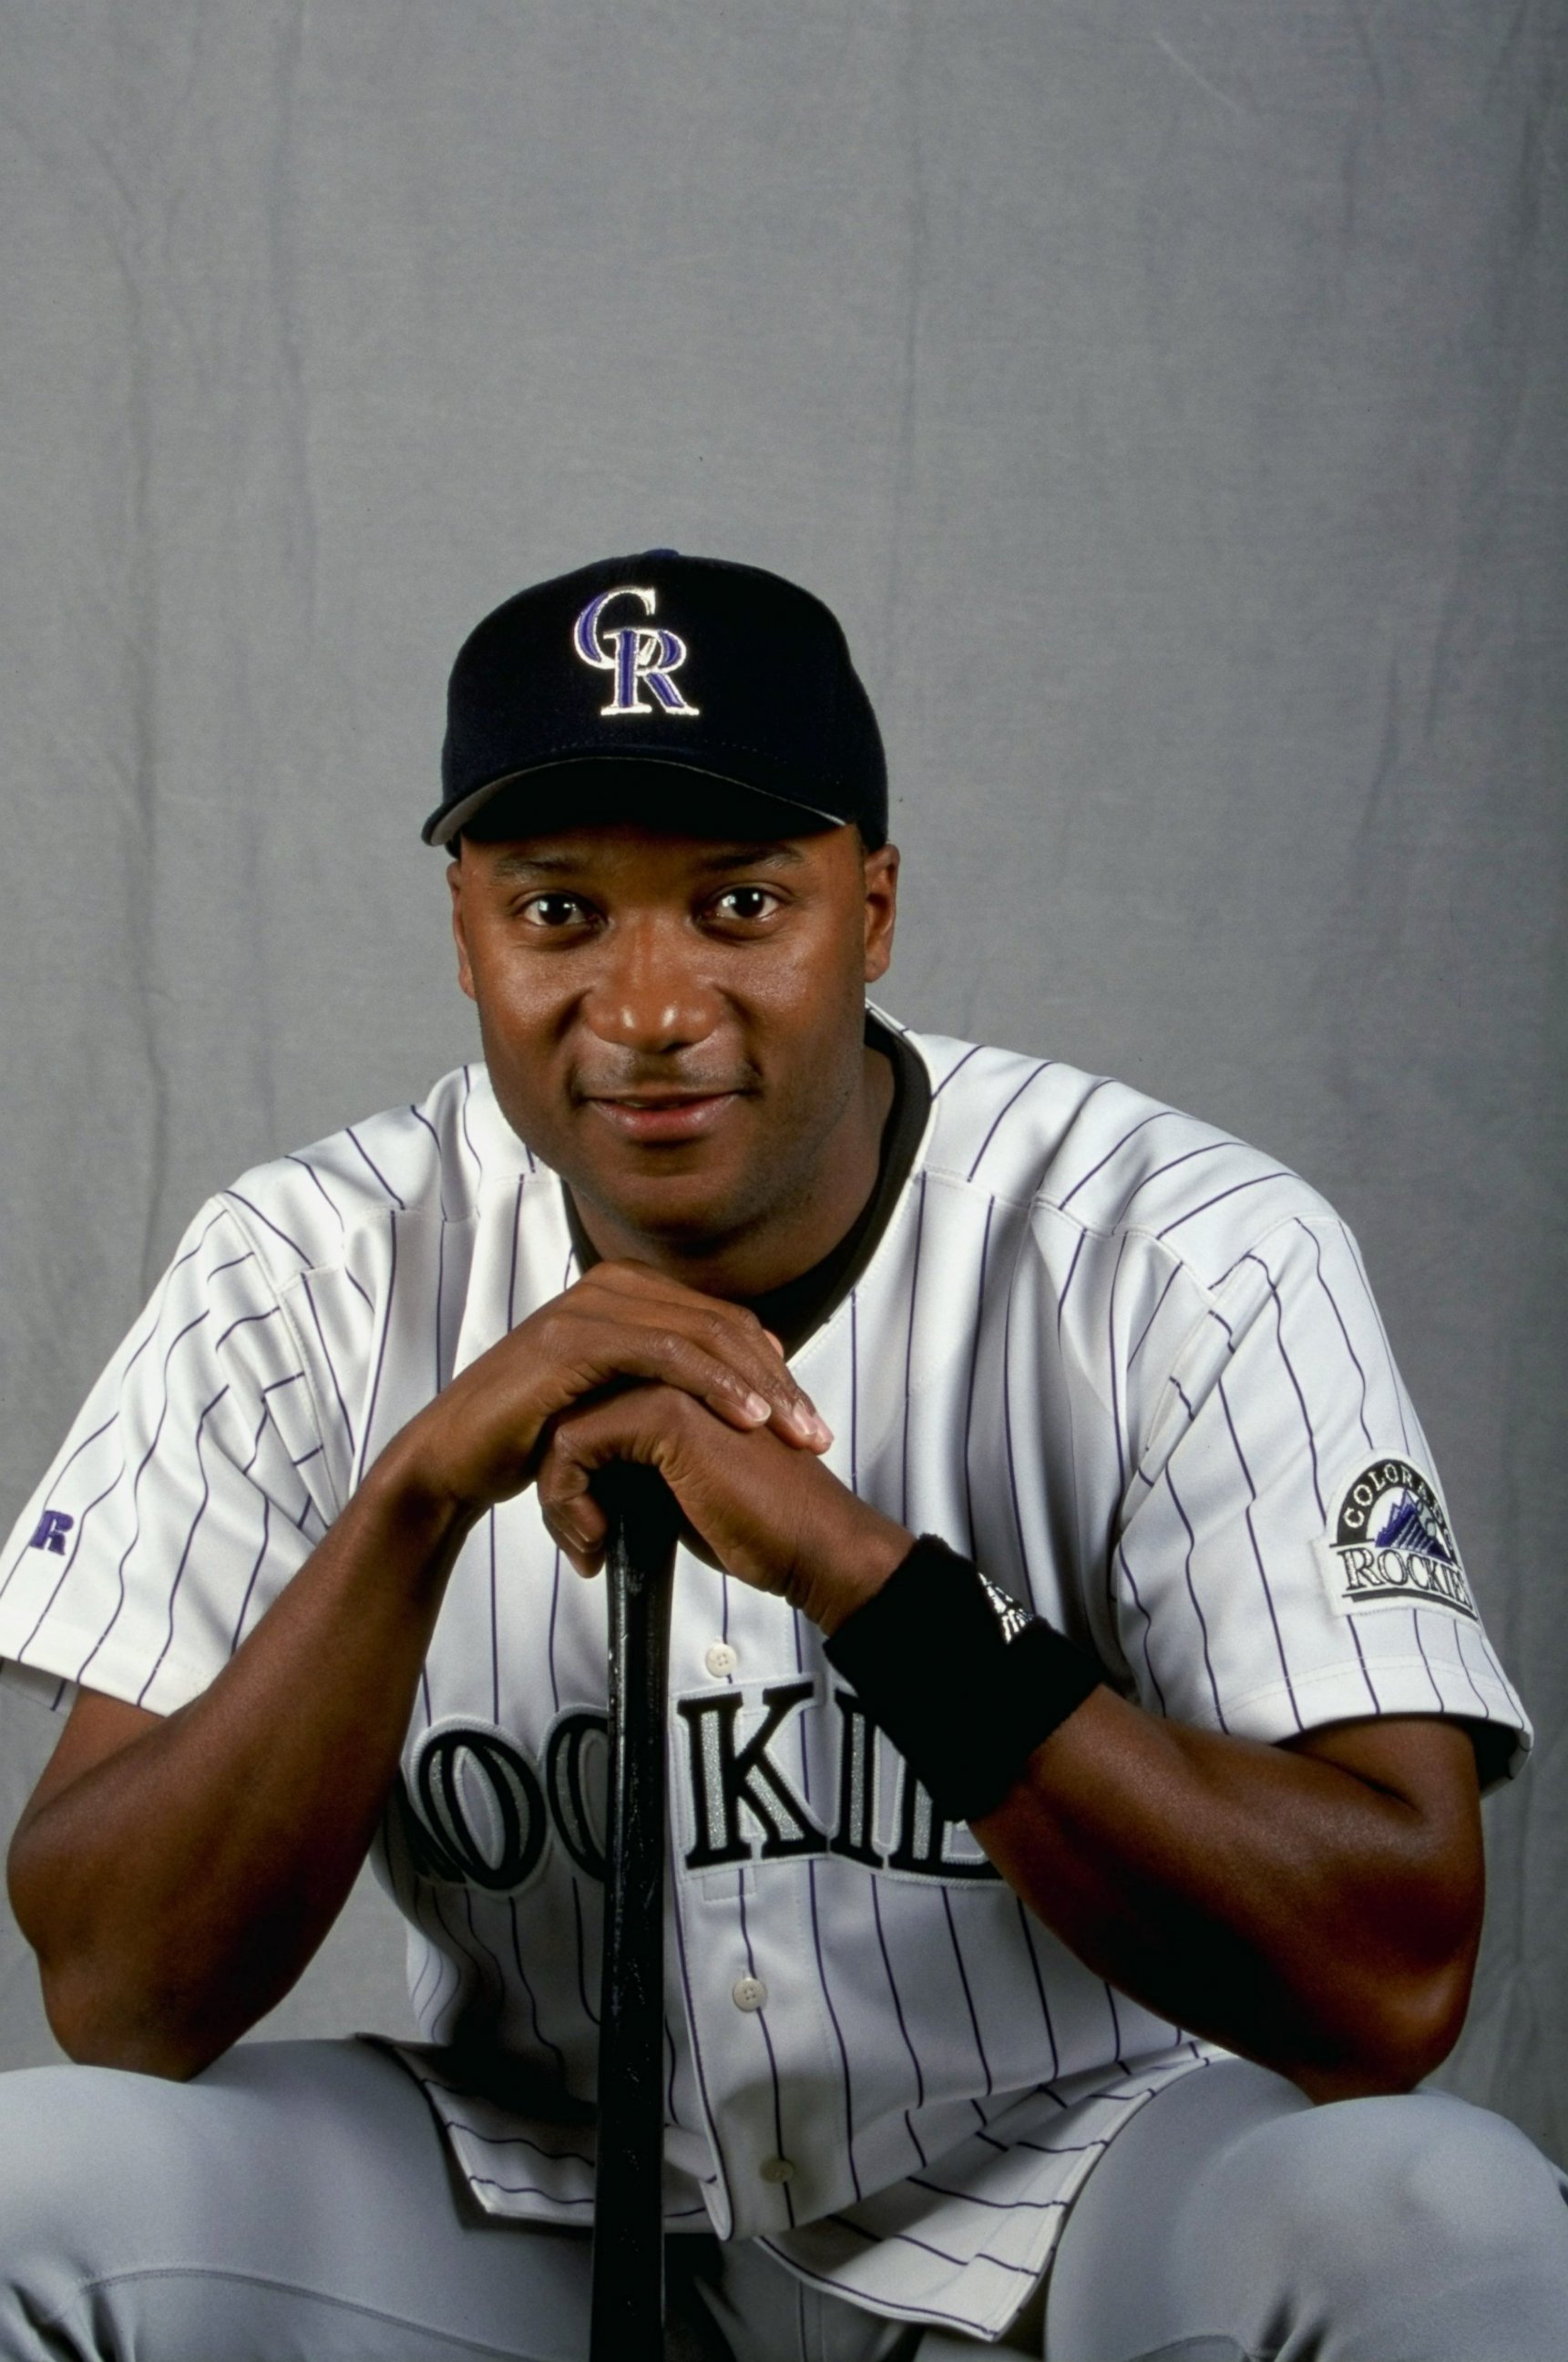 PHOTO: Outfielder Darryl Hamilton of the Colorado Rockies poses for a studio portrait on Photo Day during Spring Training at Hi Corbett Field in Tuscon, Arizona, Feb. 25, 1999.